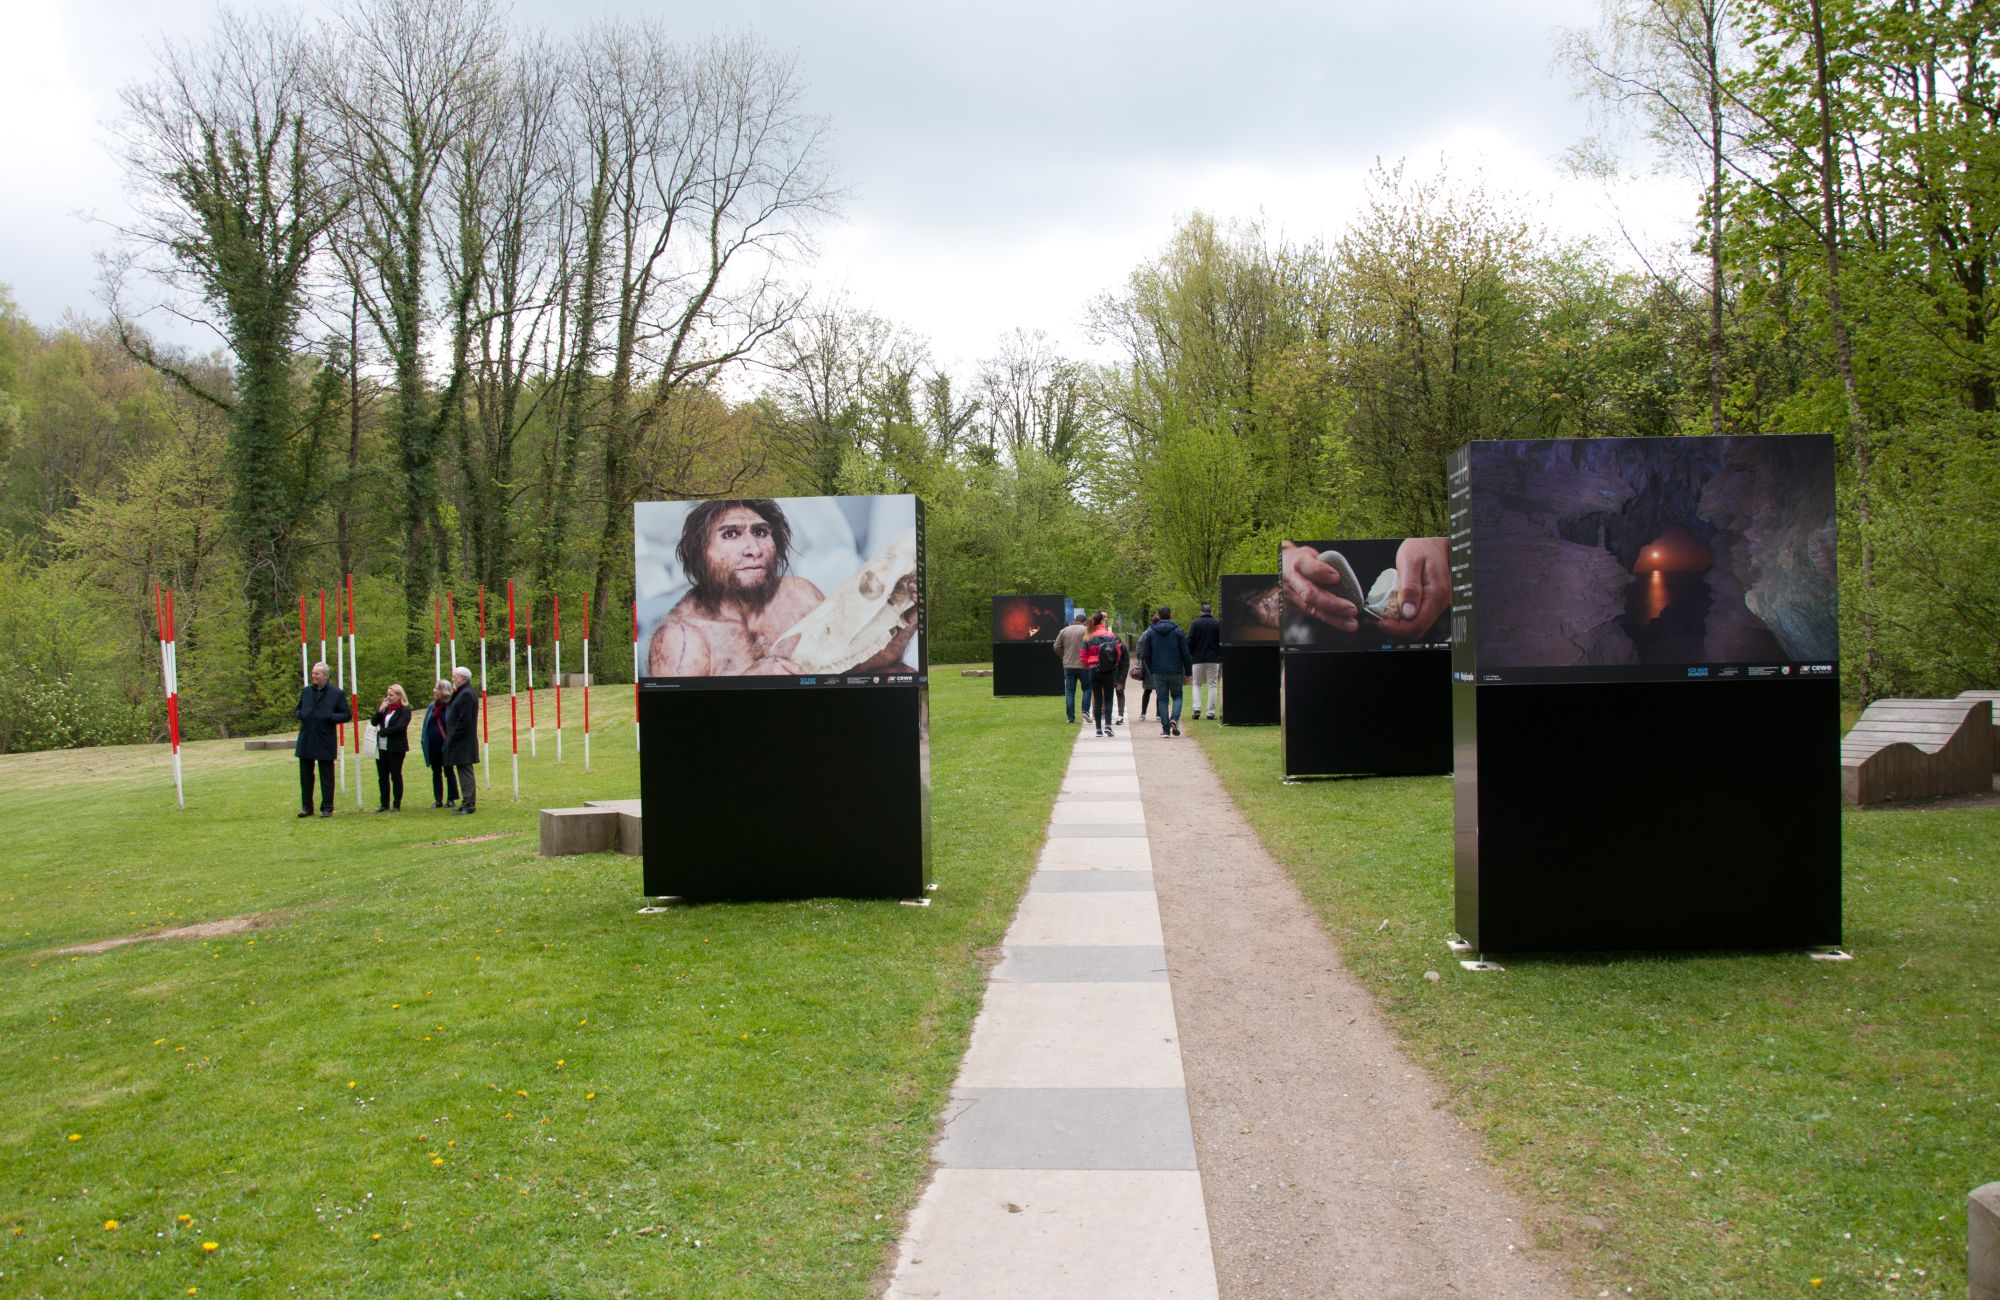 Large photo panels on a meadow, in between visitors